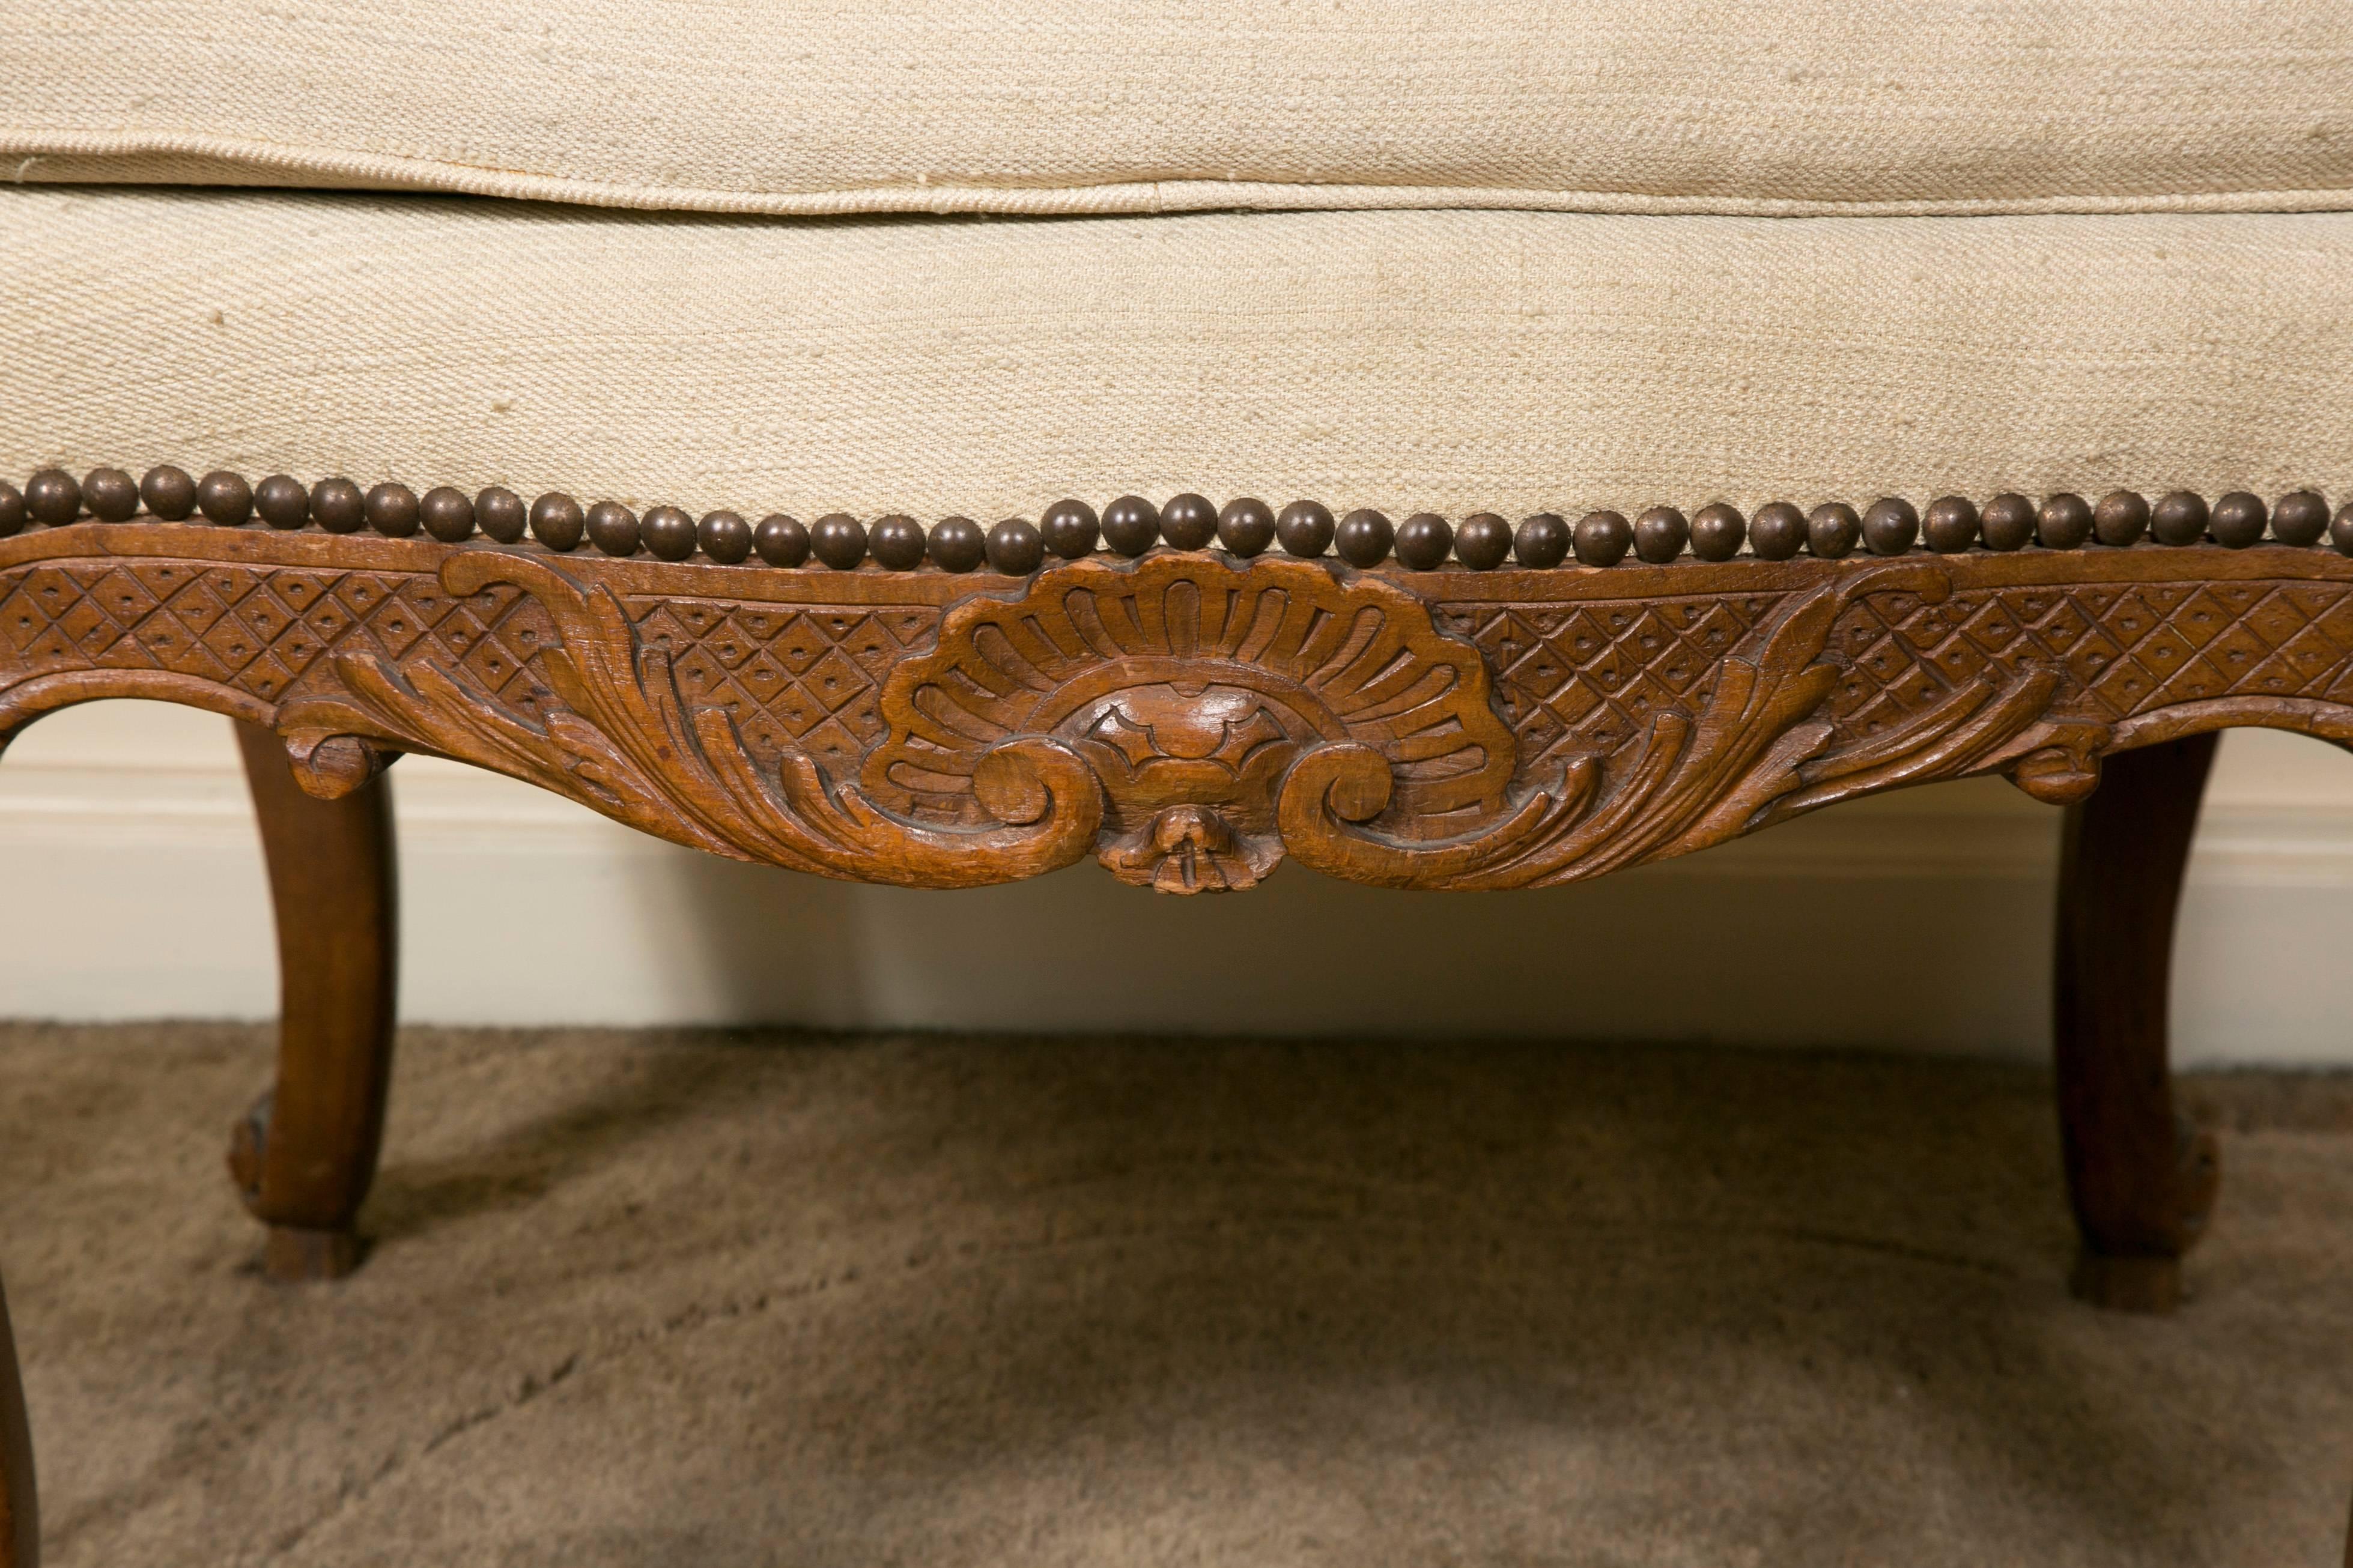 Beautifully executed with fine attention to details, French Regency style carved wood stool on cabriole legs ending with snail feet, decorated with shells and foliage

sizes are with cushion.